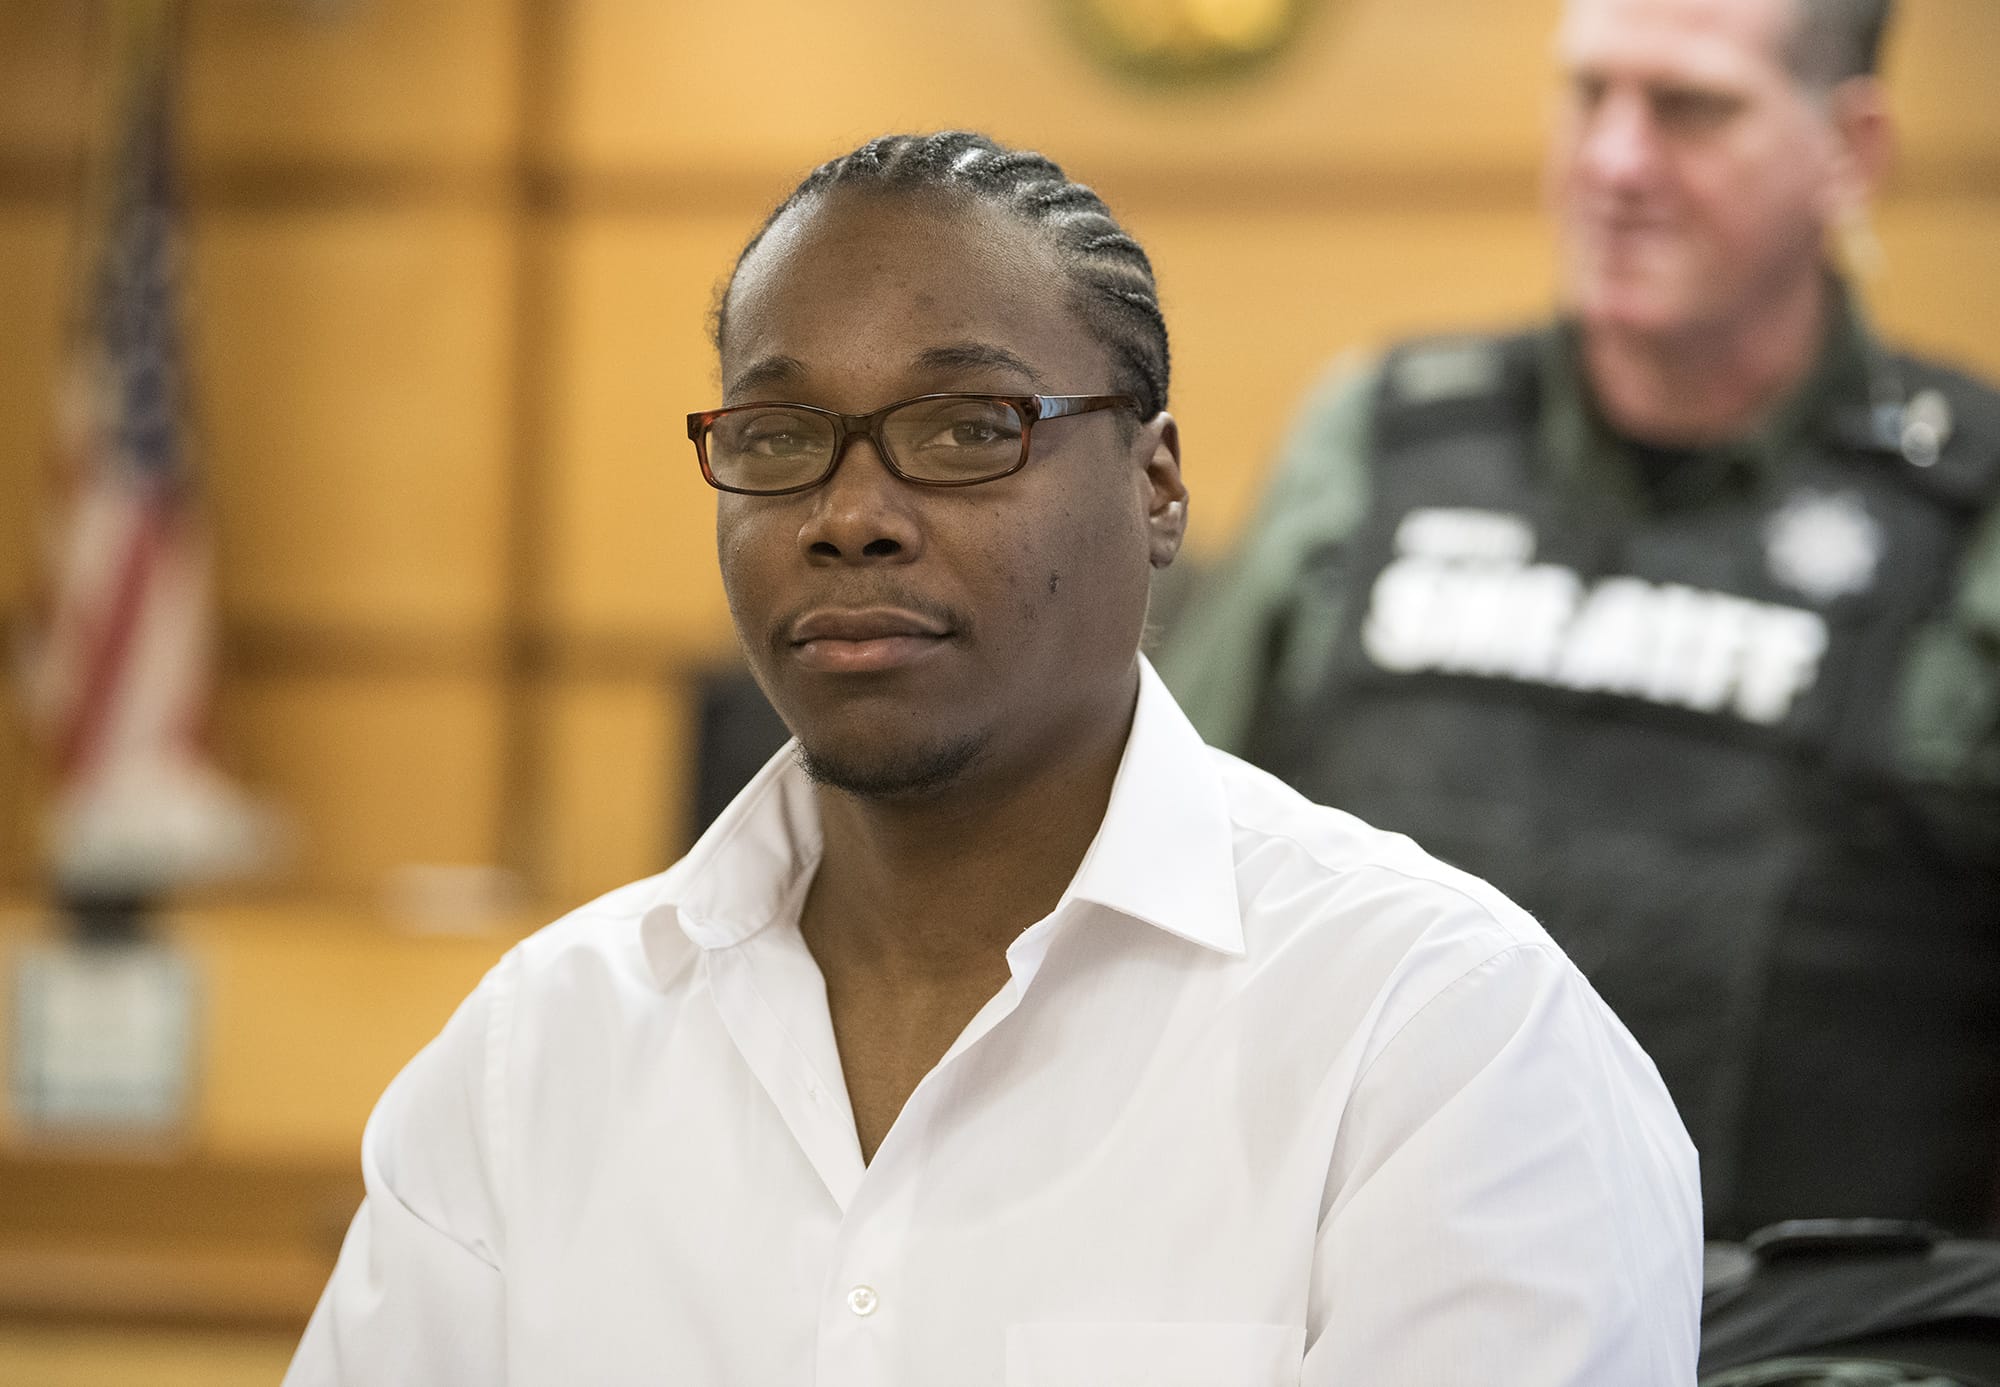 Arkangel D. Howard of Portland is escorted into Clark County Superior Court for opening statements in his double murder trial Wednesday. Howard is accused of fatally shooting two men at an east Vancouver apartment complex in March 2017.